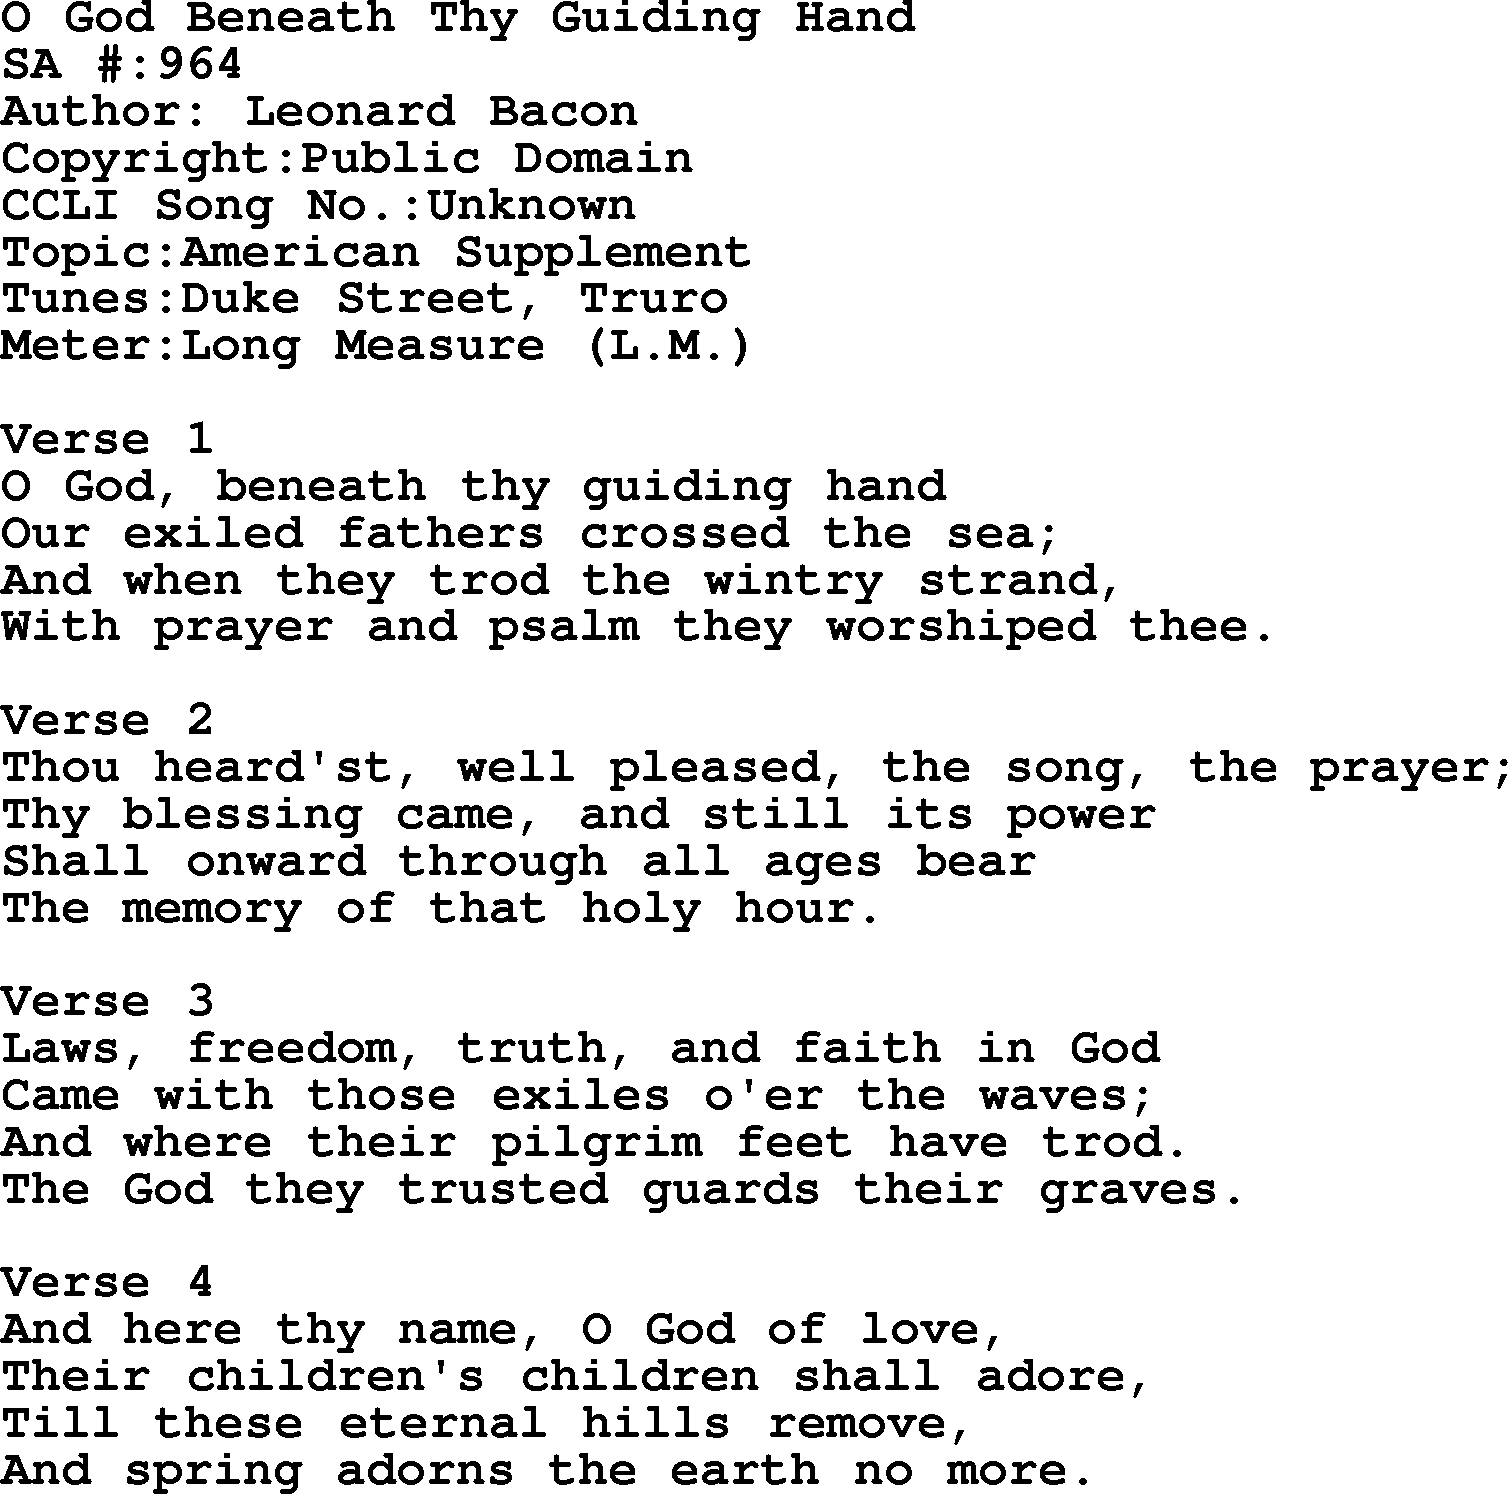 Salvation Army Hymnal, title: O God Beneath Thy Guiding Hand, with lyrics and PDF,